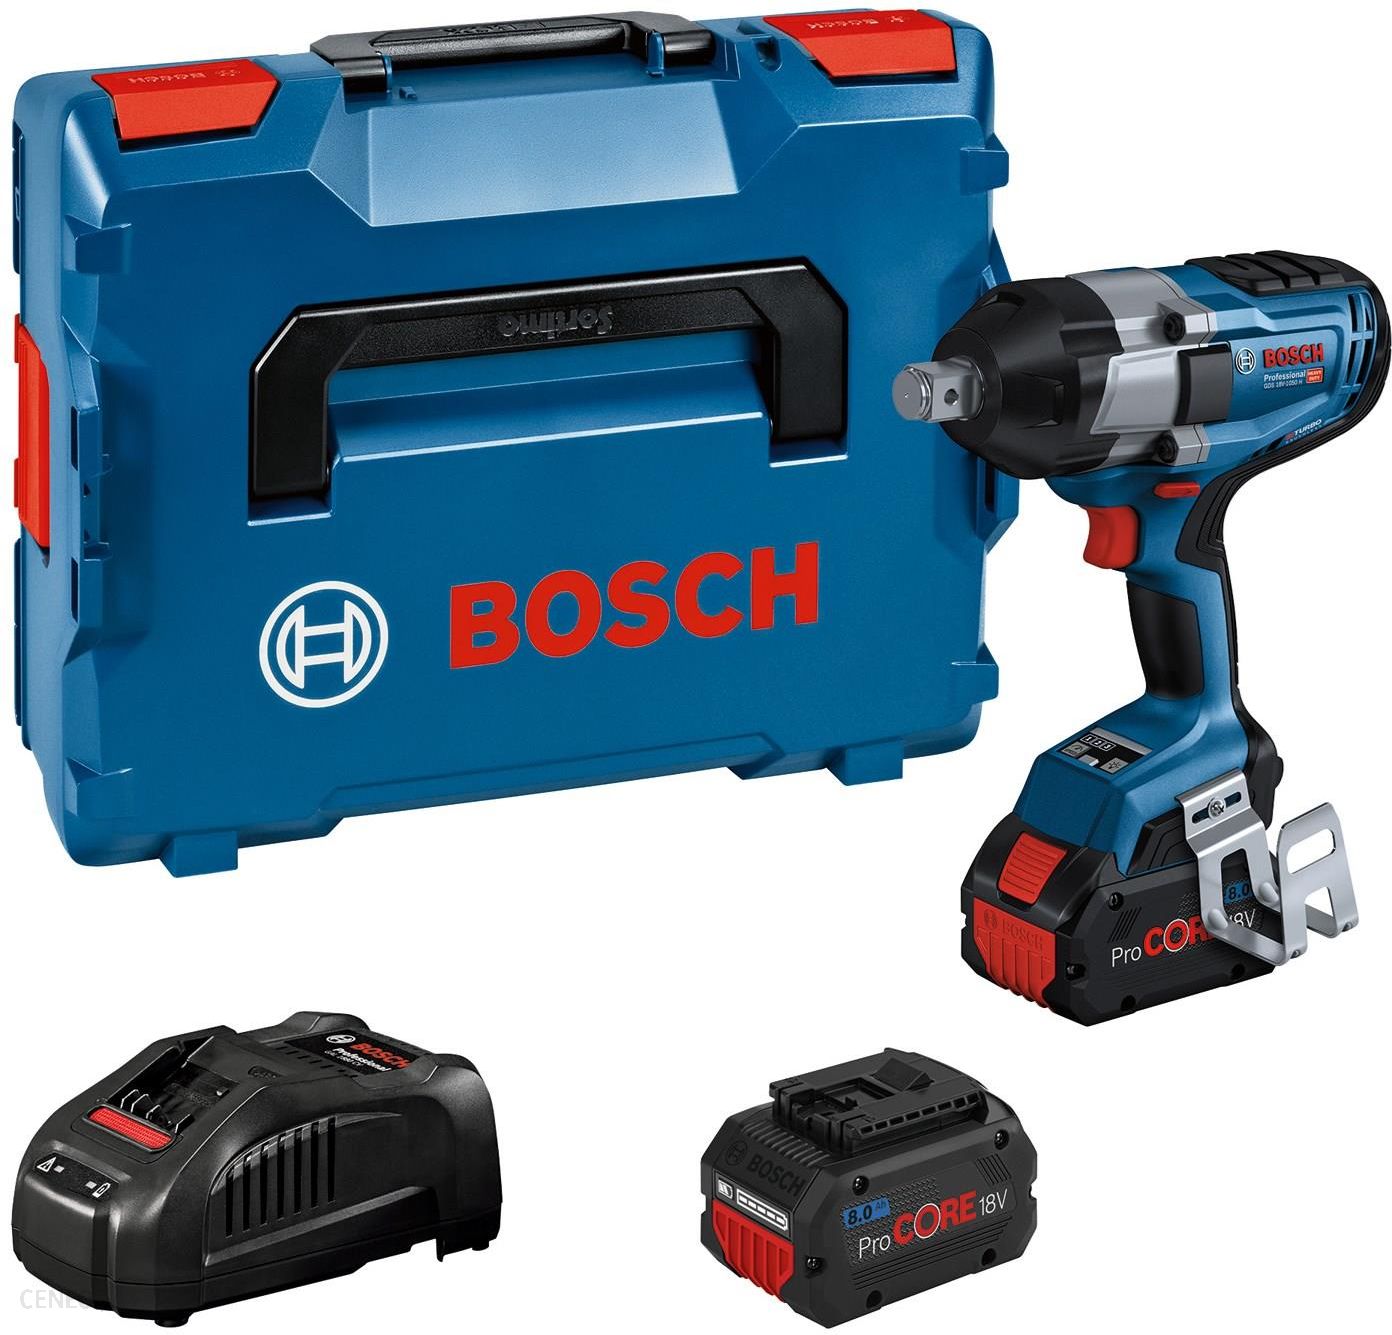 Bosch GDS 18V-1050 HC Professional Cordless Impact Wrench - Body Only